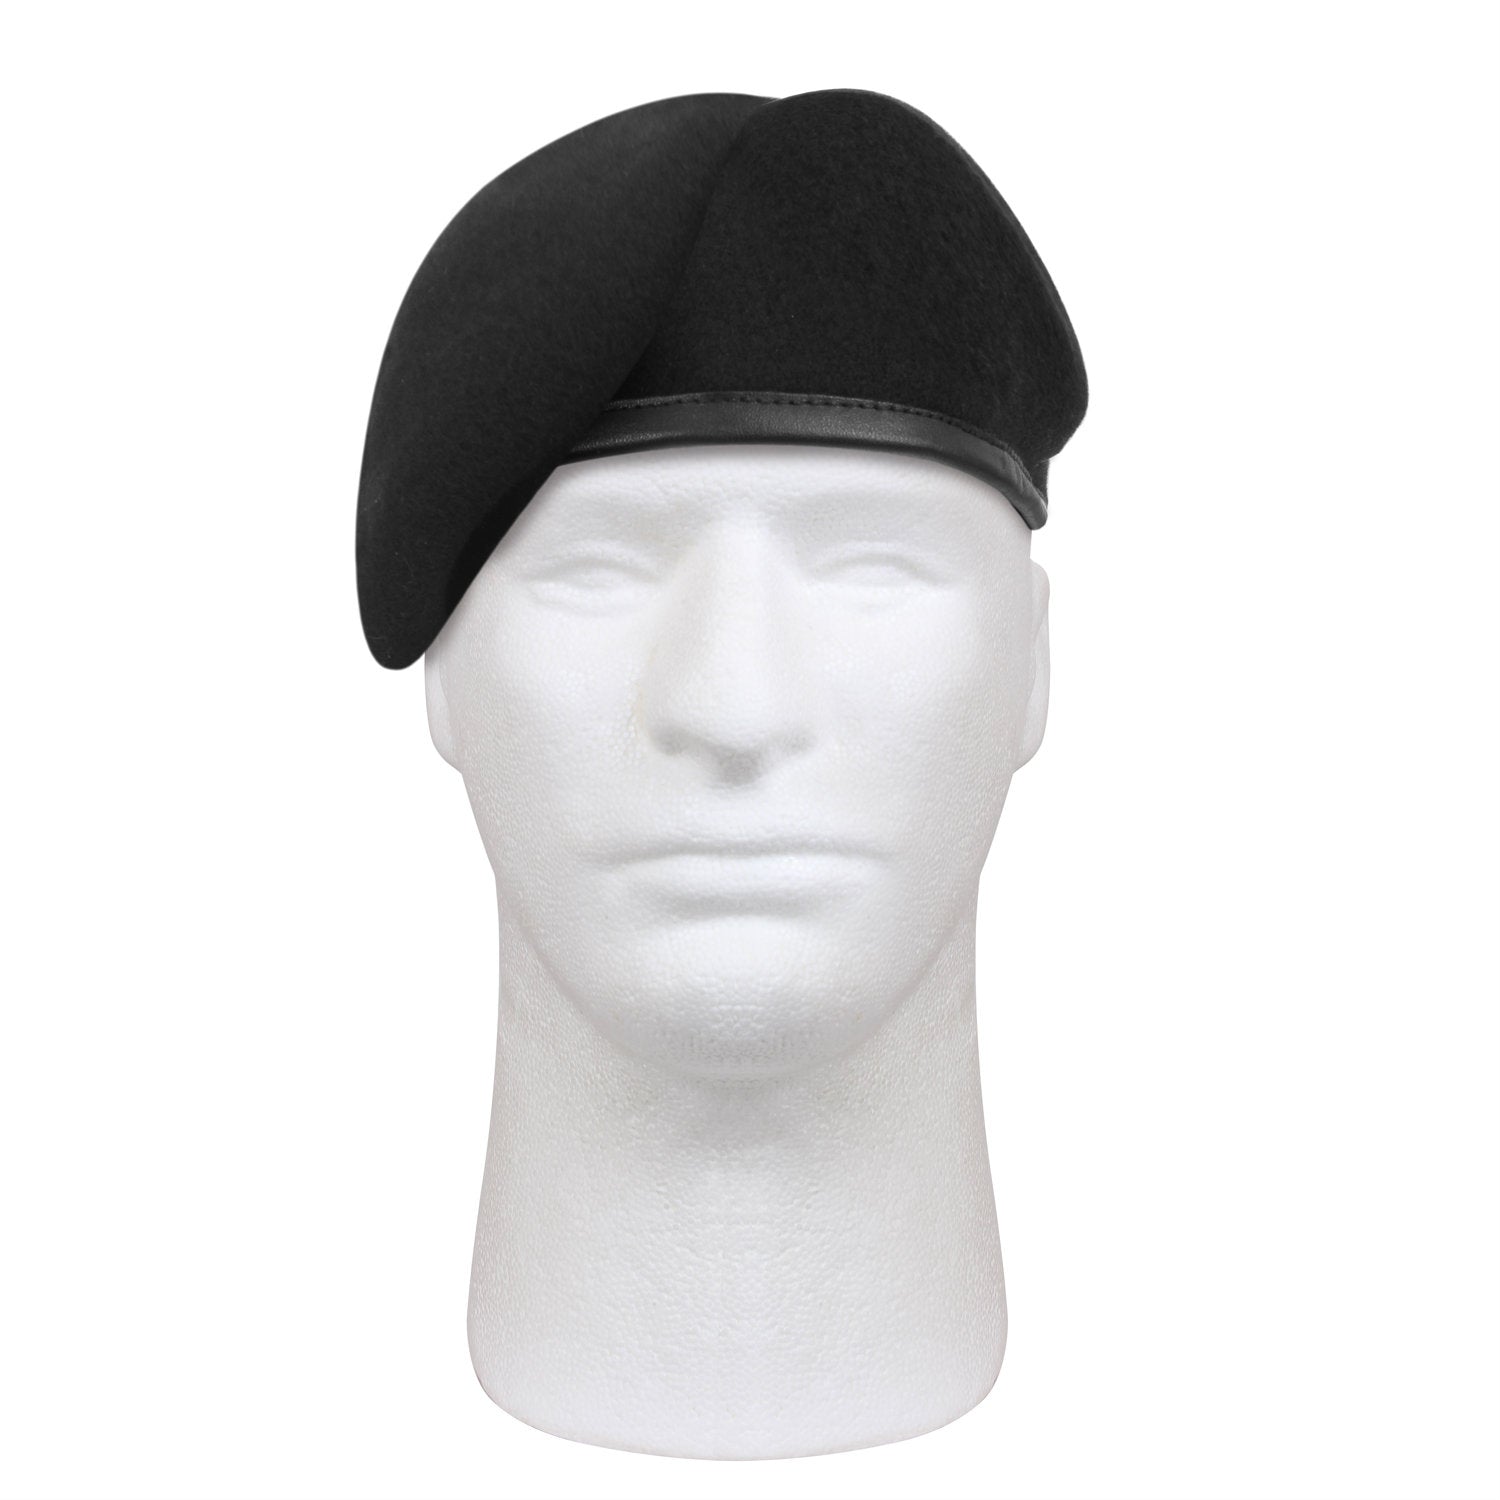 GI Style Inspection Ready Wool Beret